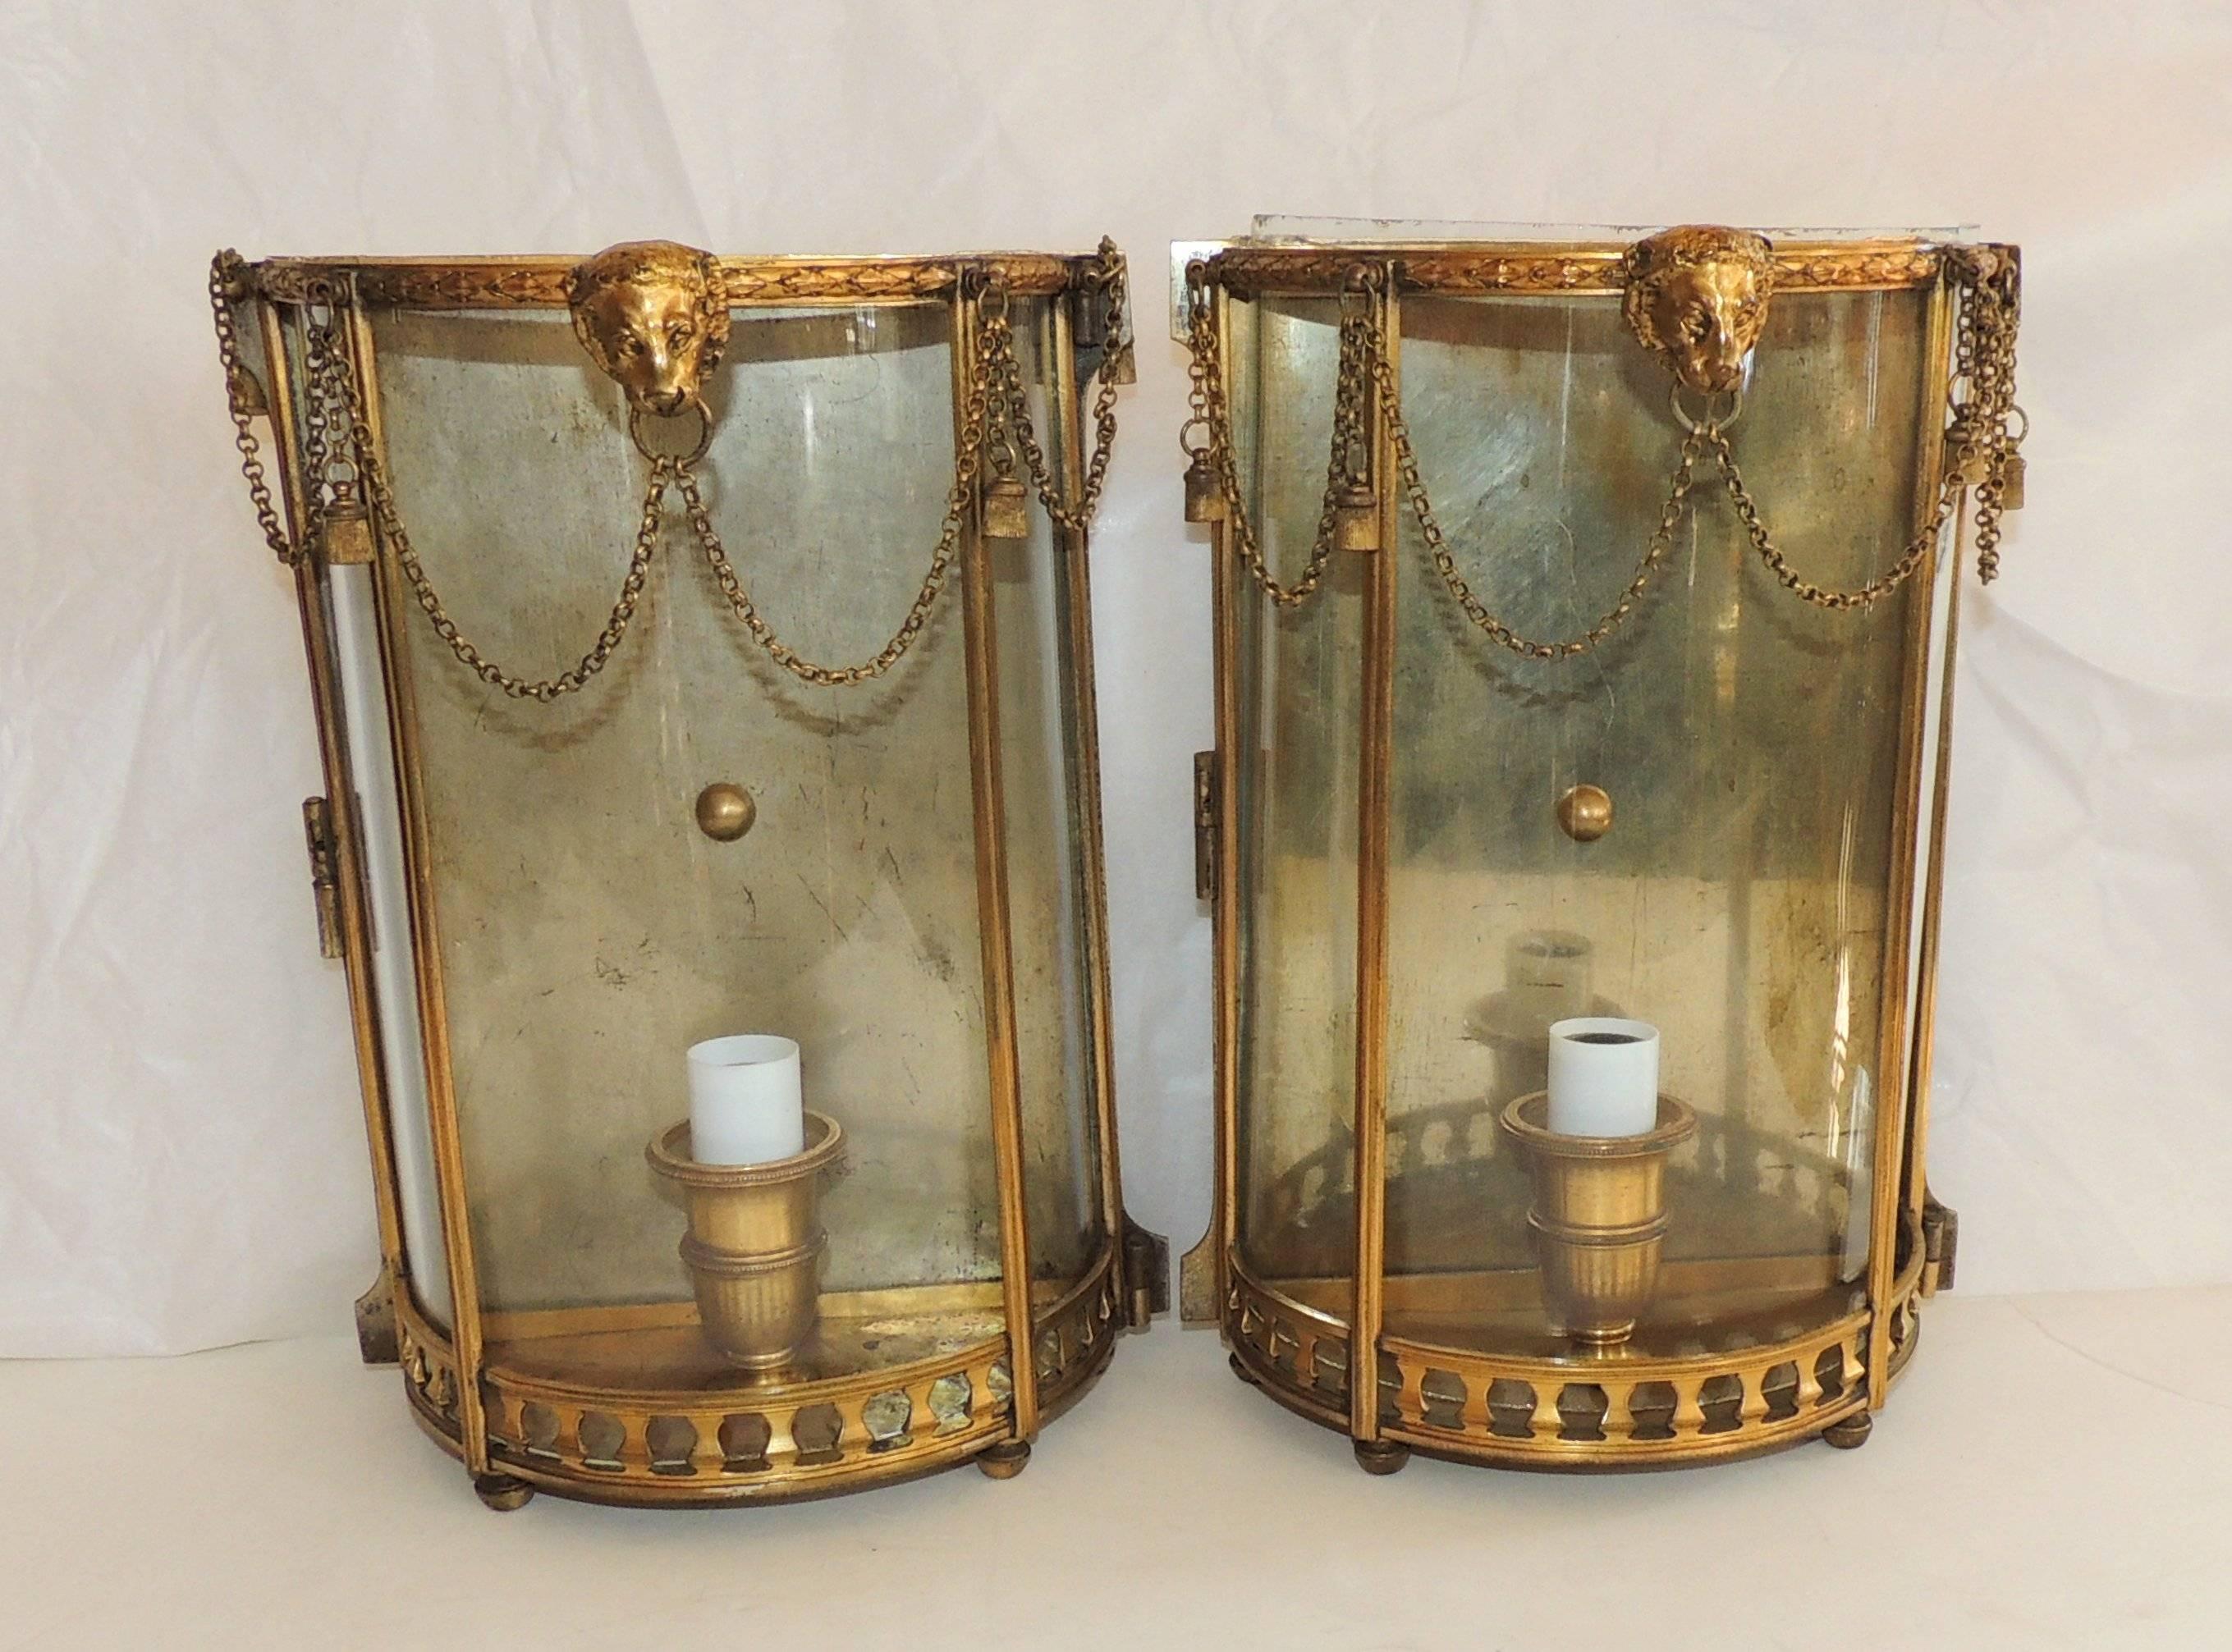 Wonderful French pair of neoclassical lion curved glass draped chain and tassels swag Caldwell Lantern style wall sconces. 

Measures: 7"W x 9.75"H x 3.75"D.